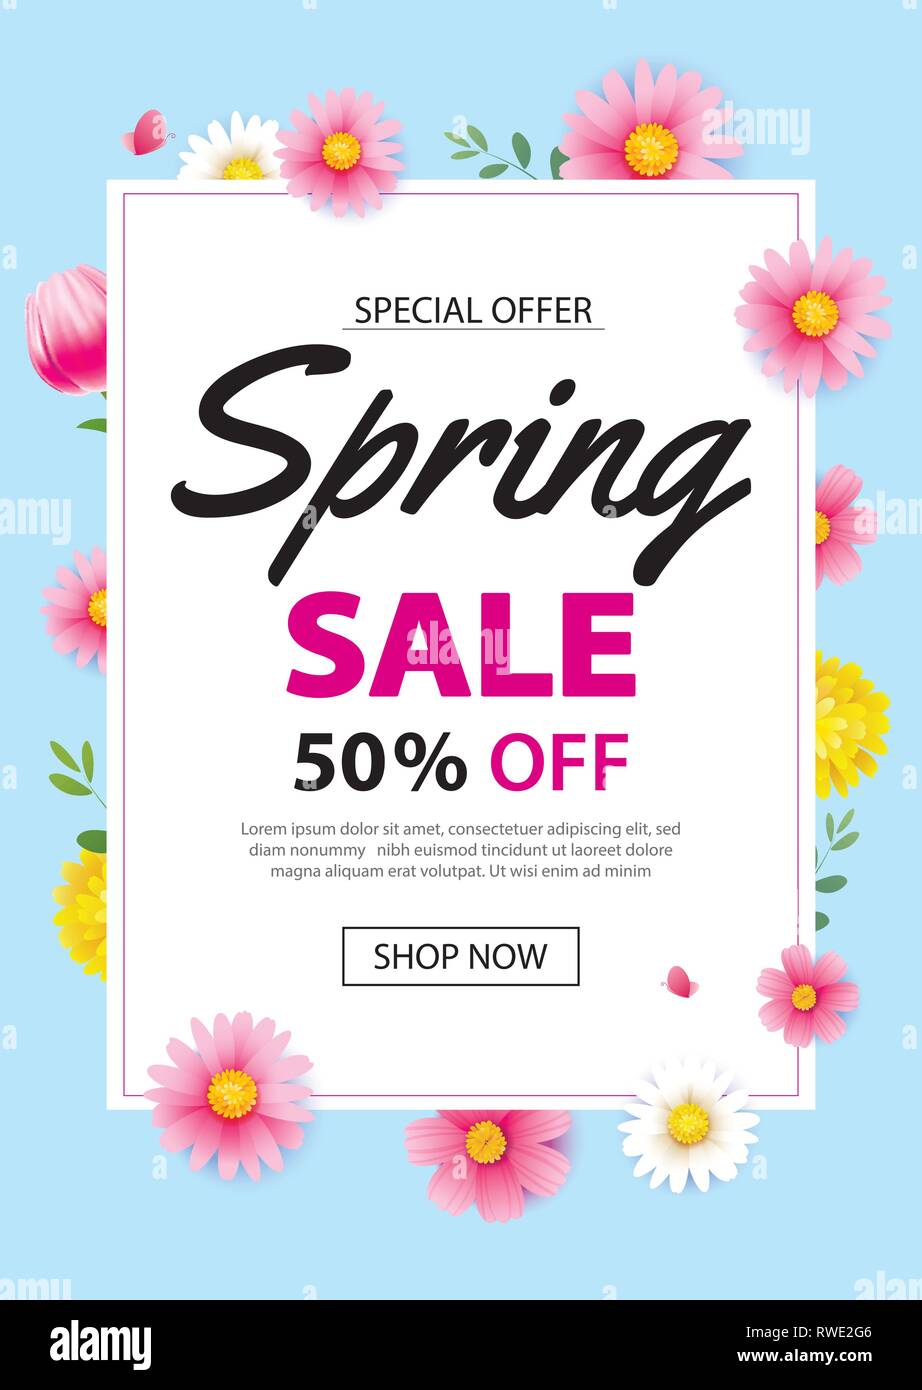 https://c8.alamy.com/comp/RWE2G6/spring-sale-poster-banner-with-blooming-flowers-background-template-design-for-advertising-voucher-flyers-brochure-cover-discount-RWE2G6.jpg